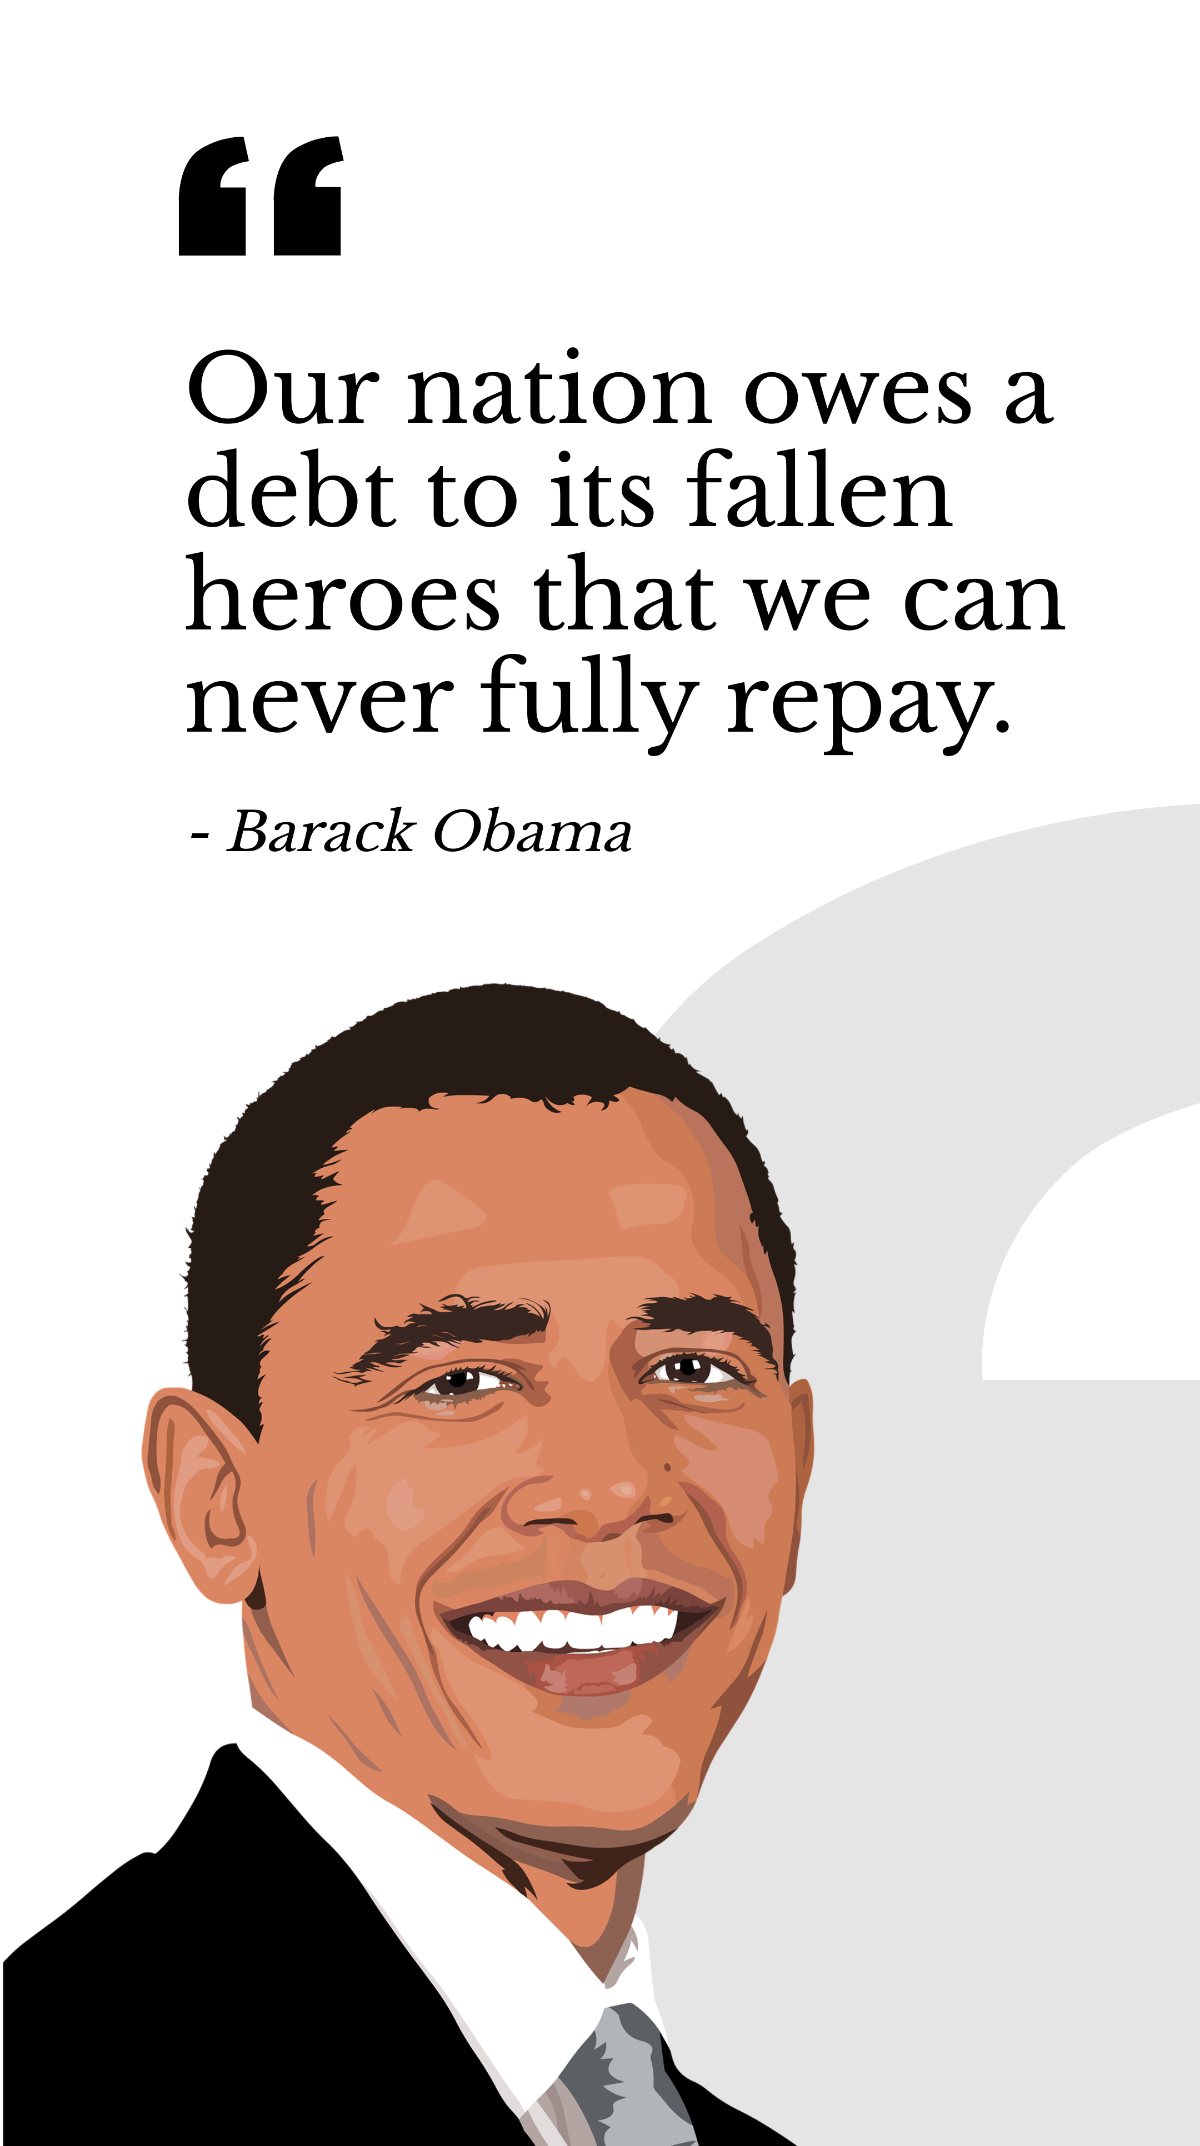 Barack Obama - "Our nation owes a debt to its fallen heroes that we can never fully repay."